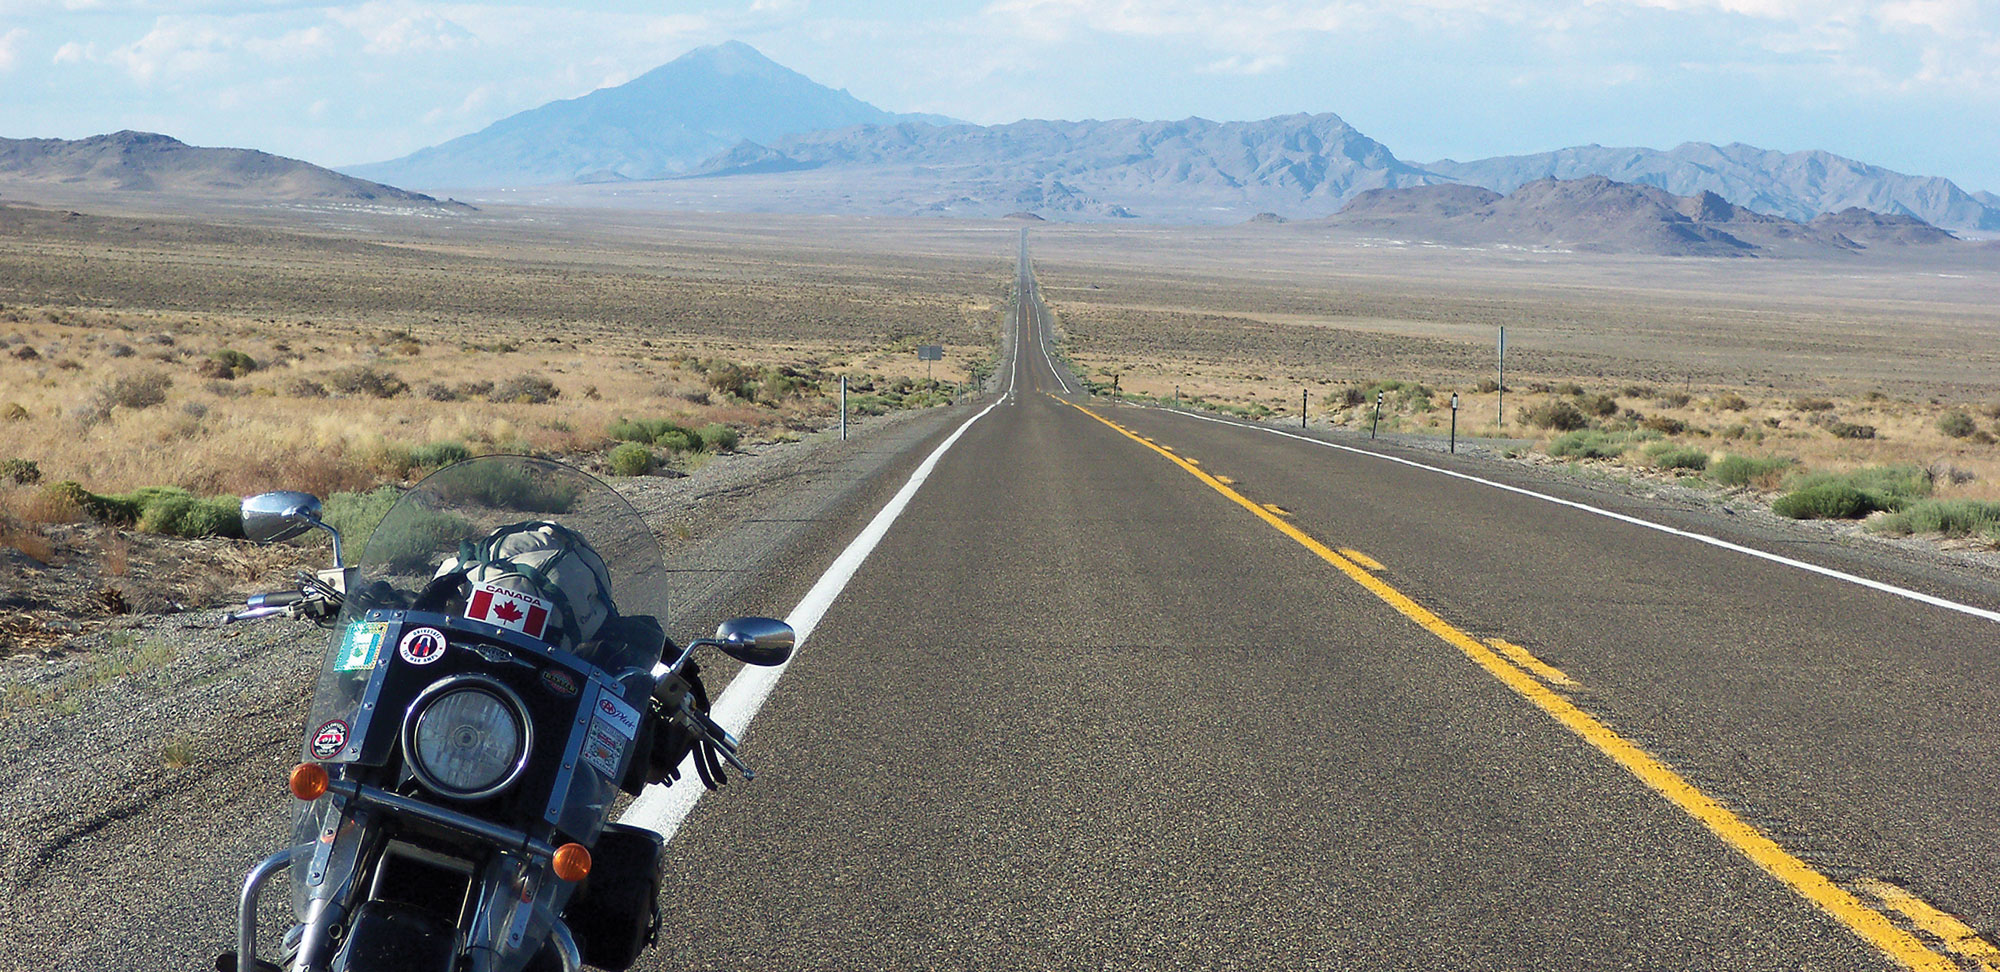 Photo of Steve Paul's bike on the side of the road in Nevada